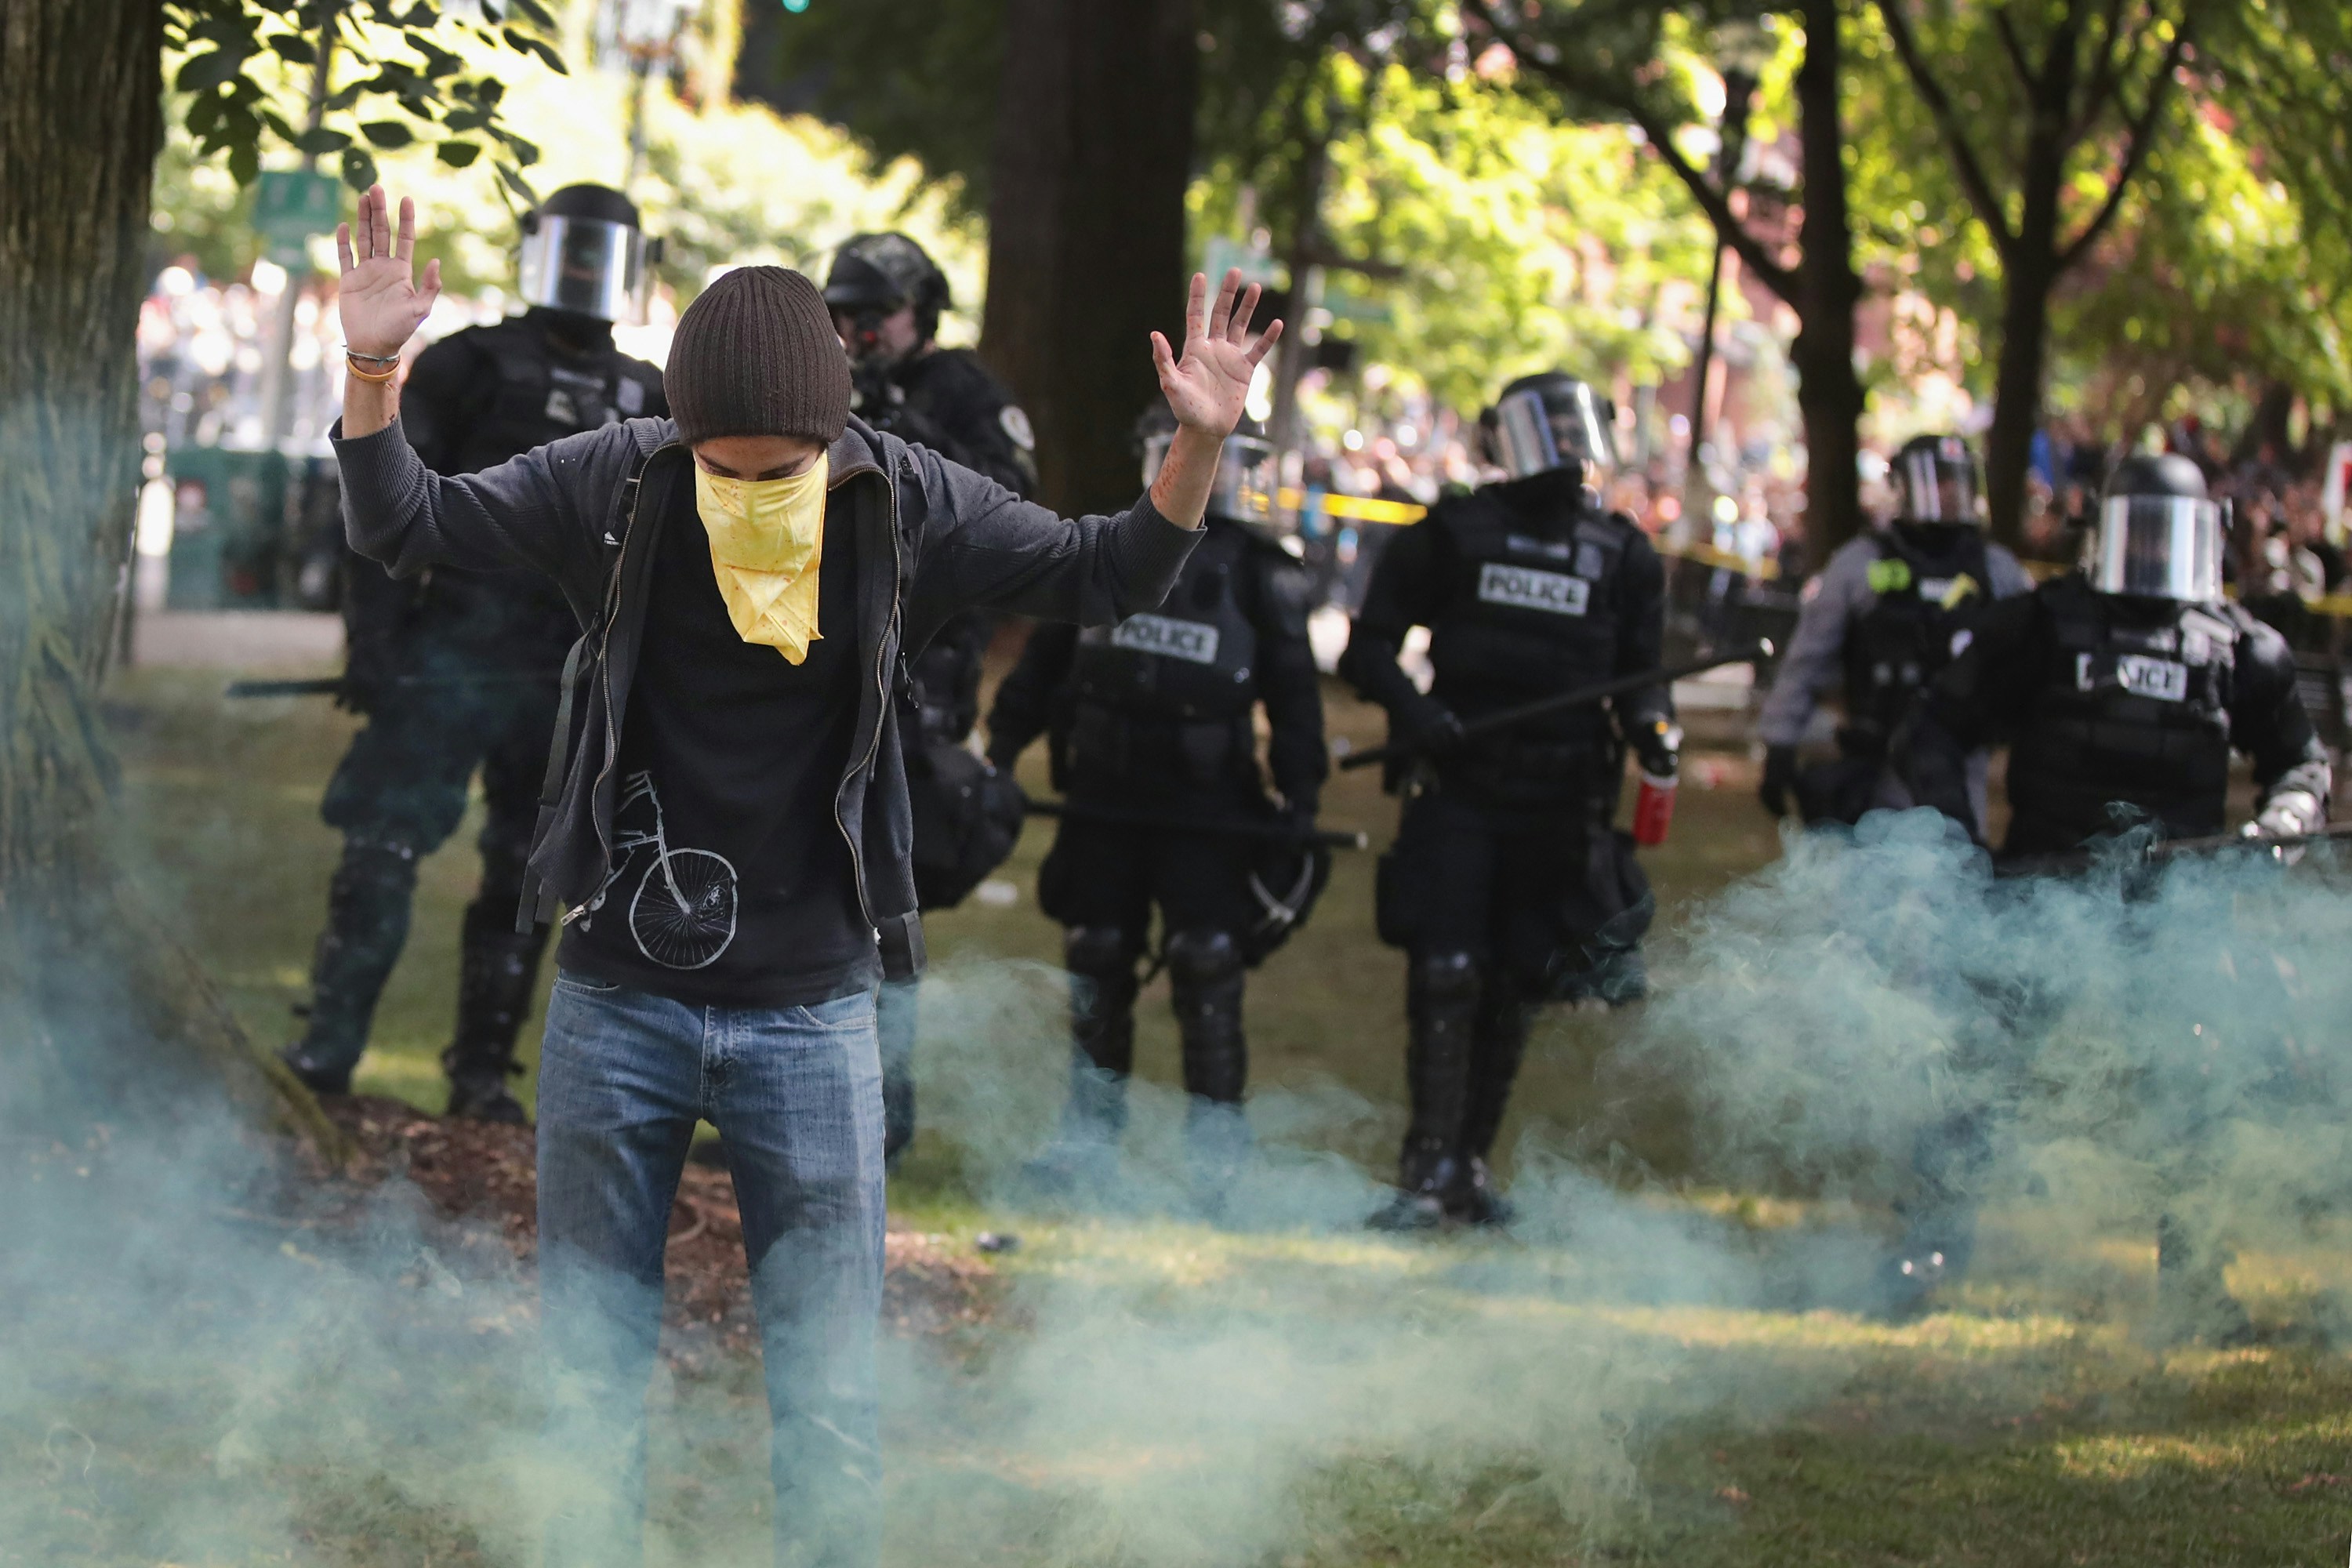 PORTLAND, OR - JUNE 04:  Antifascist demonstrators confront police during a protest on June 4, 2017 in Portland, Oregon. A protest dubbed "Trump Free Speech" by organizers was met by a large contingent of counter-demonstrators who viewed the protest as a promotion racism. Many residents of Portland are still coming to terms with the recent violent attack on the city's MAX train line when Ricky Best, 53, and Taliesin Namkai-Meche, 23, were stabbed to death and Micah Fletcher,21, was severely injured after they tried to protect two teenage girls, one of whom was wearing a hijab, from being harassed with racial taunts by suspect Jeremy Christian.  (Photo by Scott Olson/Getty Images)